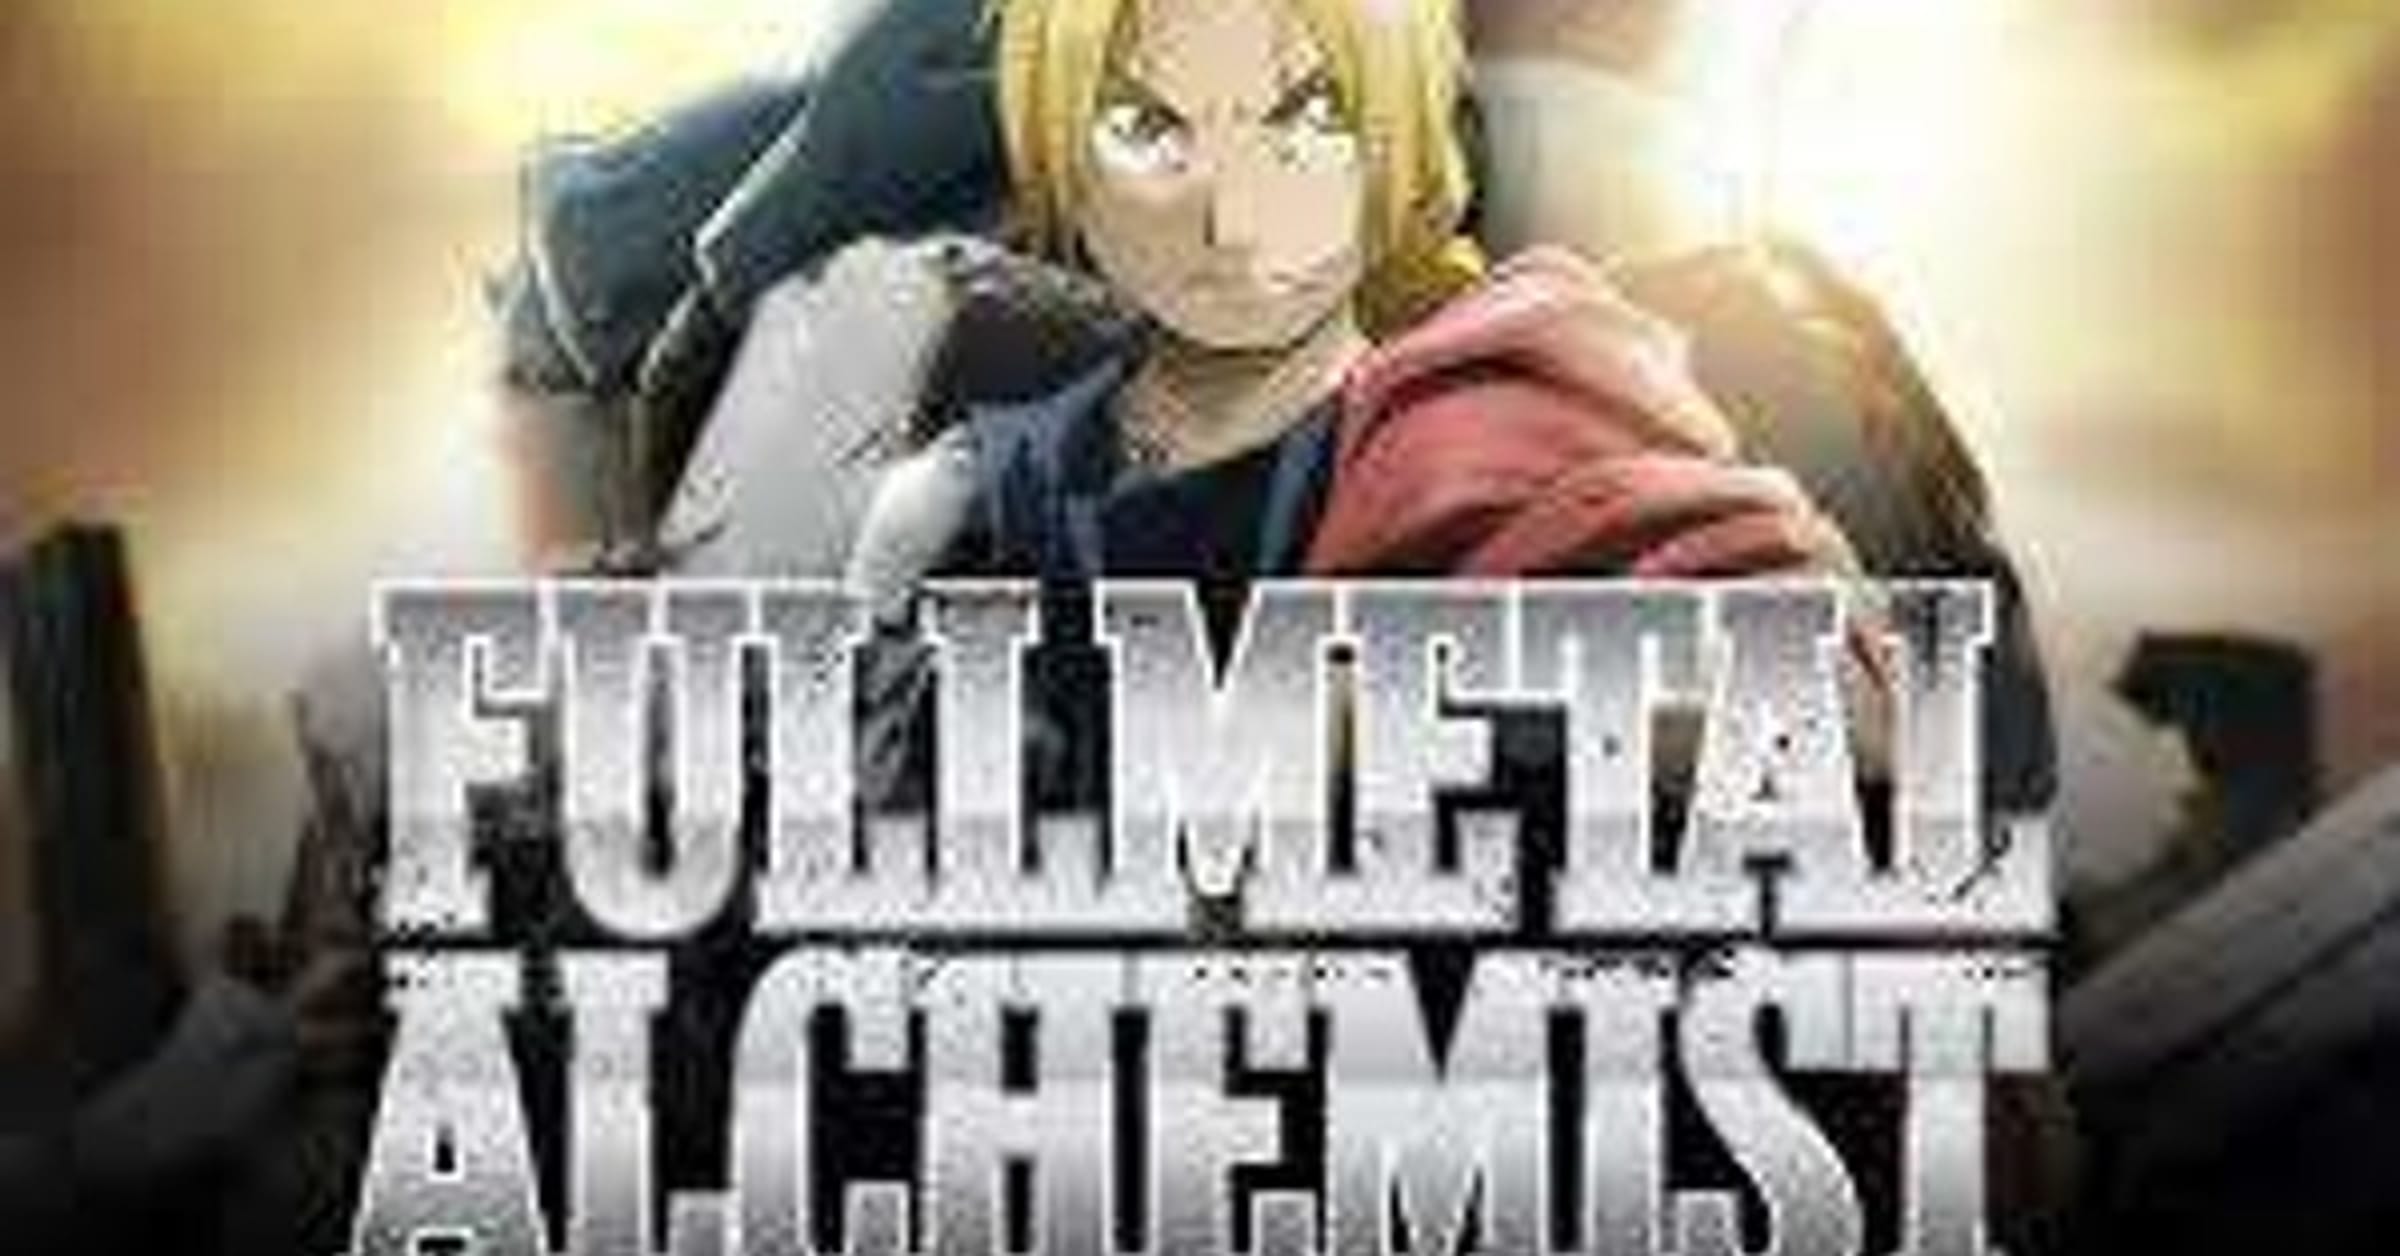 What do you think of a new gen version of Fullmetal alchemist